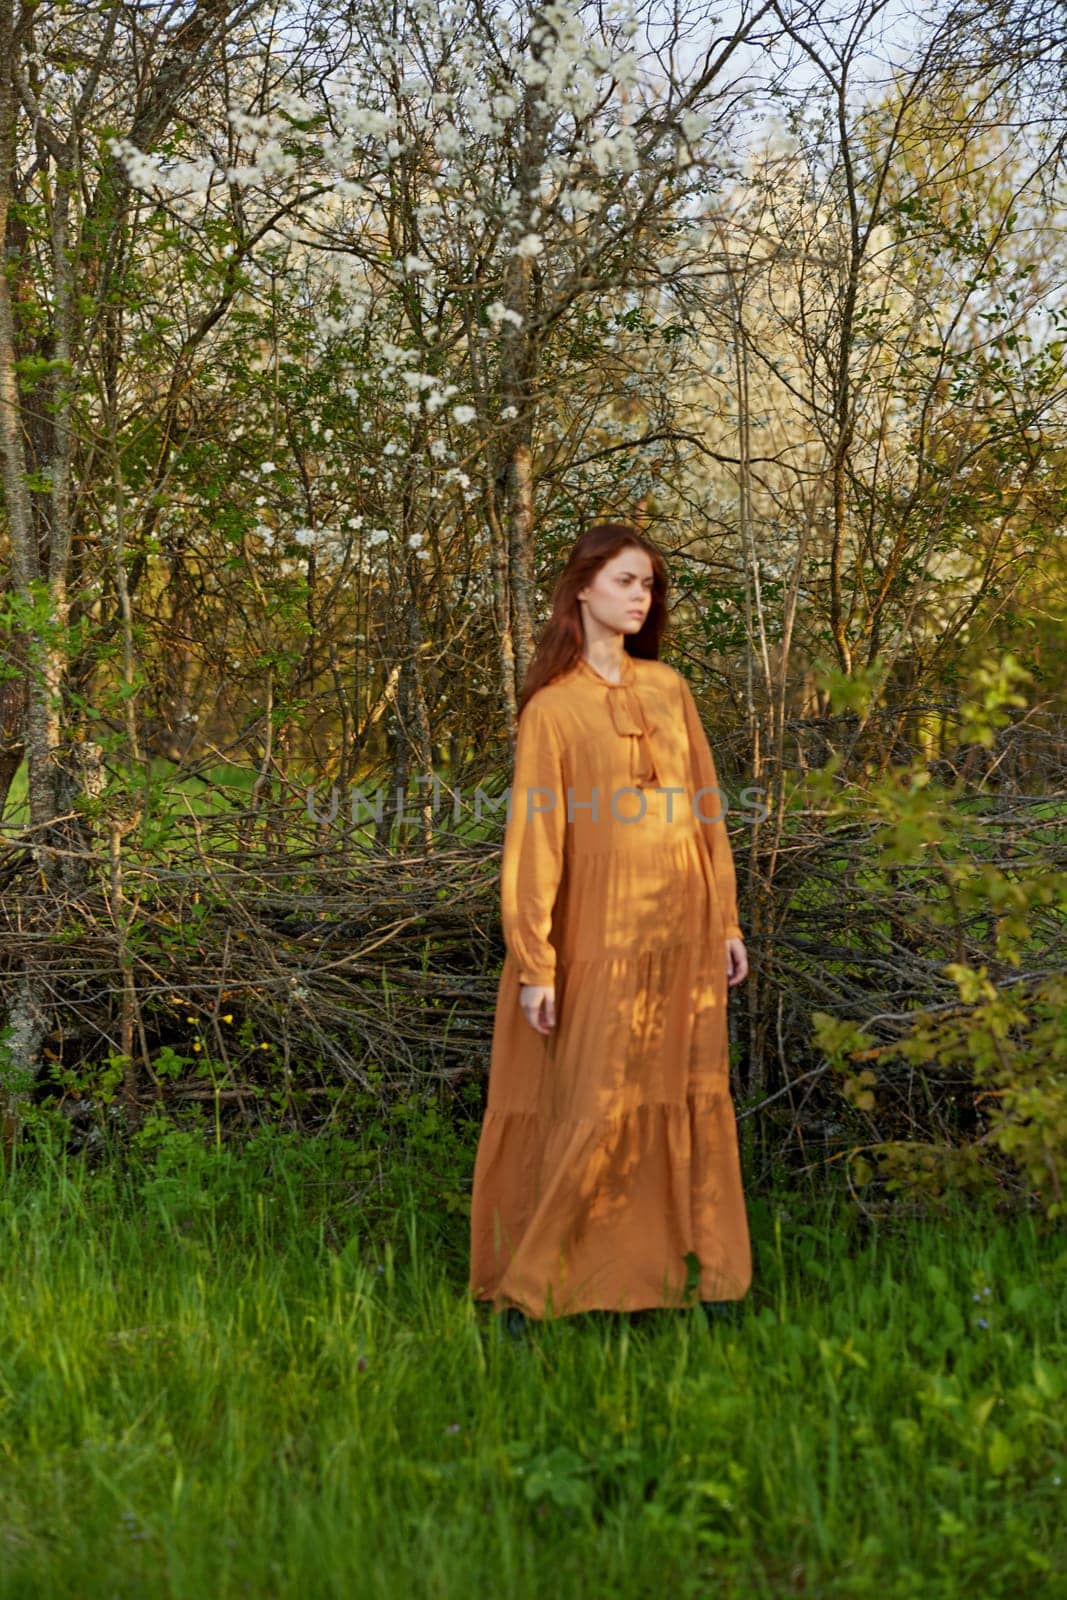 an elegant, sophisticated woman poses relaxed standing near a wicker fence at the dacha in a long orange dress looking to the side. Vertical photography in nature. High quality photo